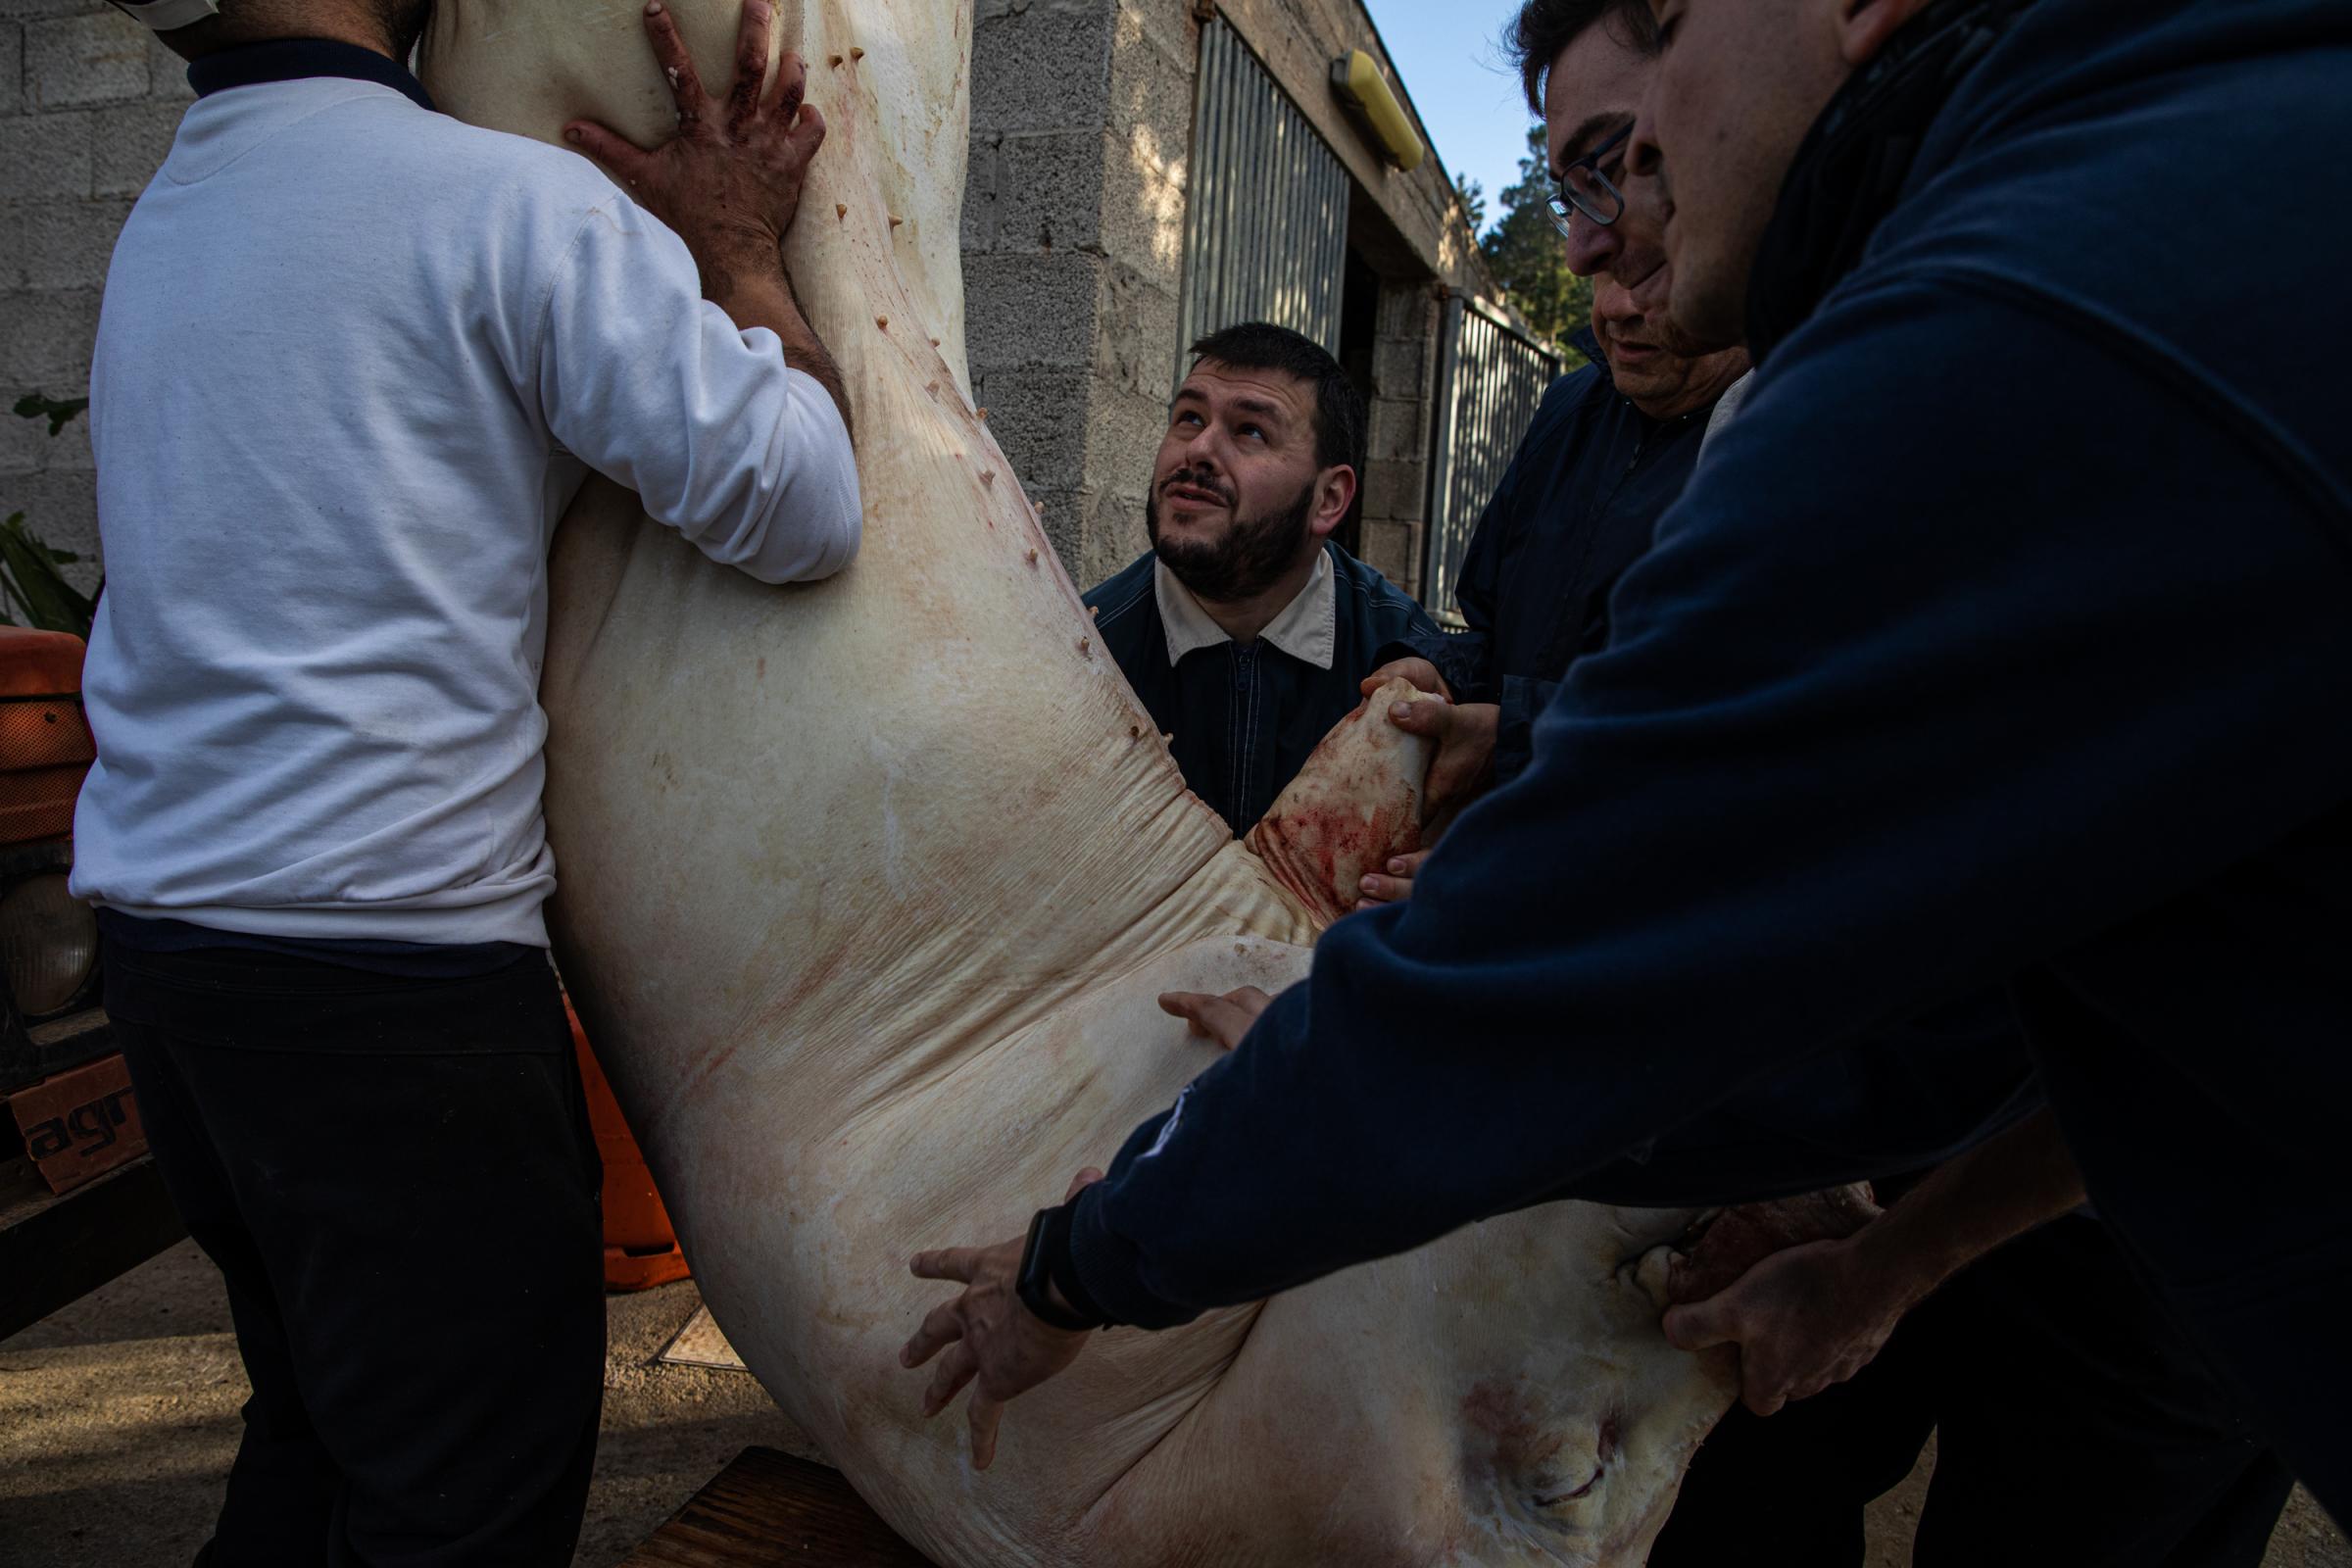 Spain's Sustainable Swine Slaughtering For Prized Iberian  - IBIZA, SPAIN - DECEMBER 06: Owner and helpers hang the...